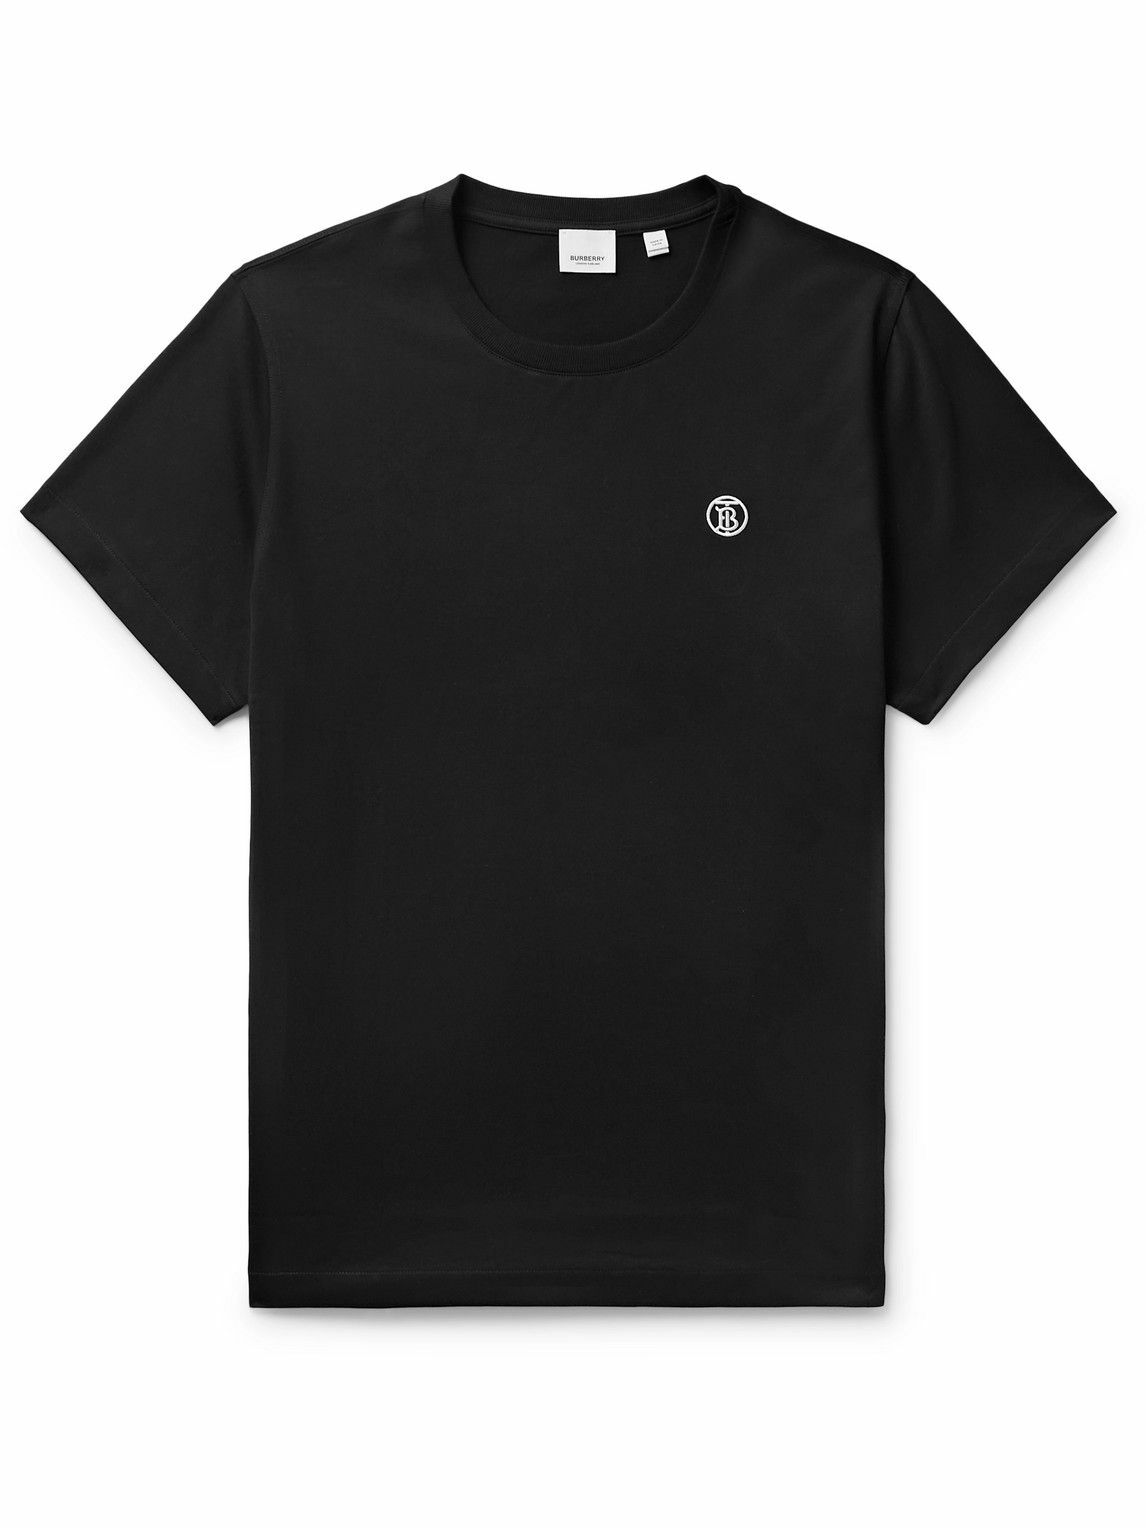 Burberry - Logo-Embroidered Cotton-Jersey T-Shirt - Black Burberry